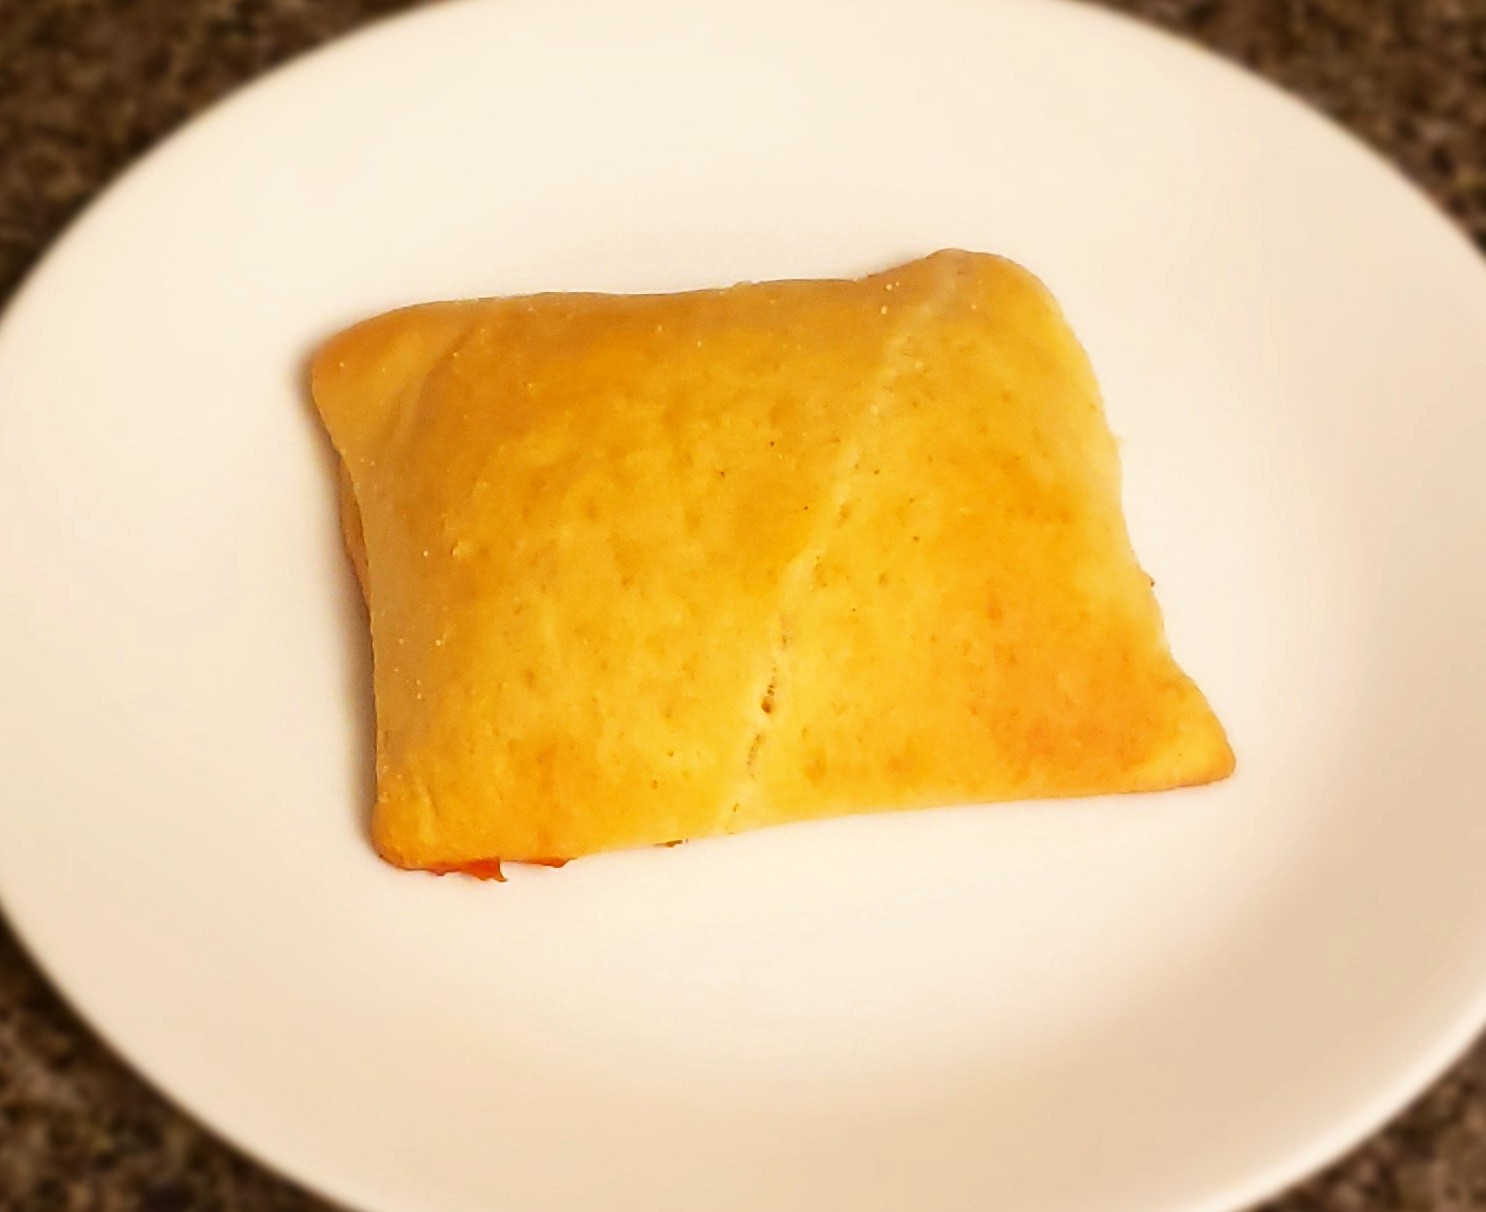 A square piece of golden brown baked pastry dough on a while plate